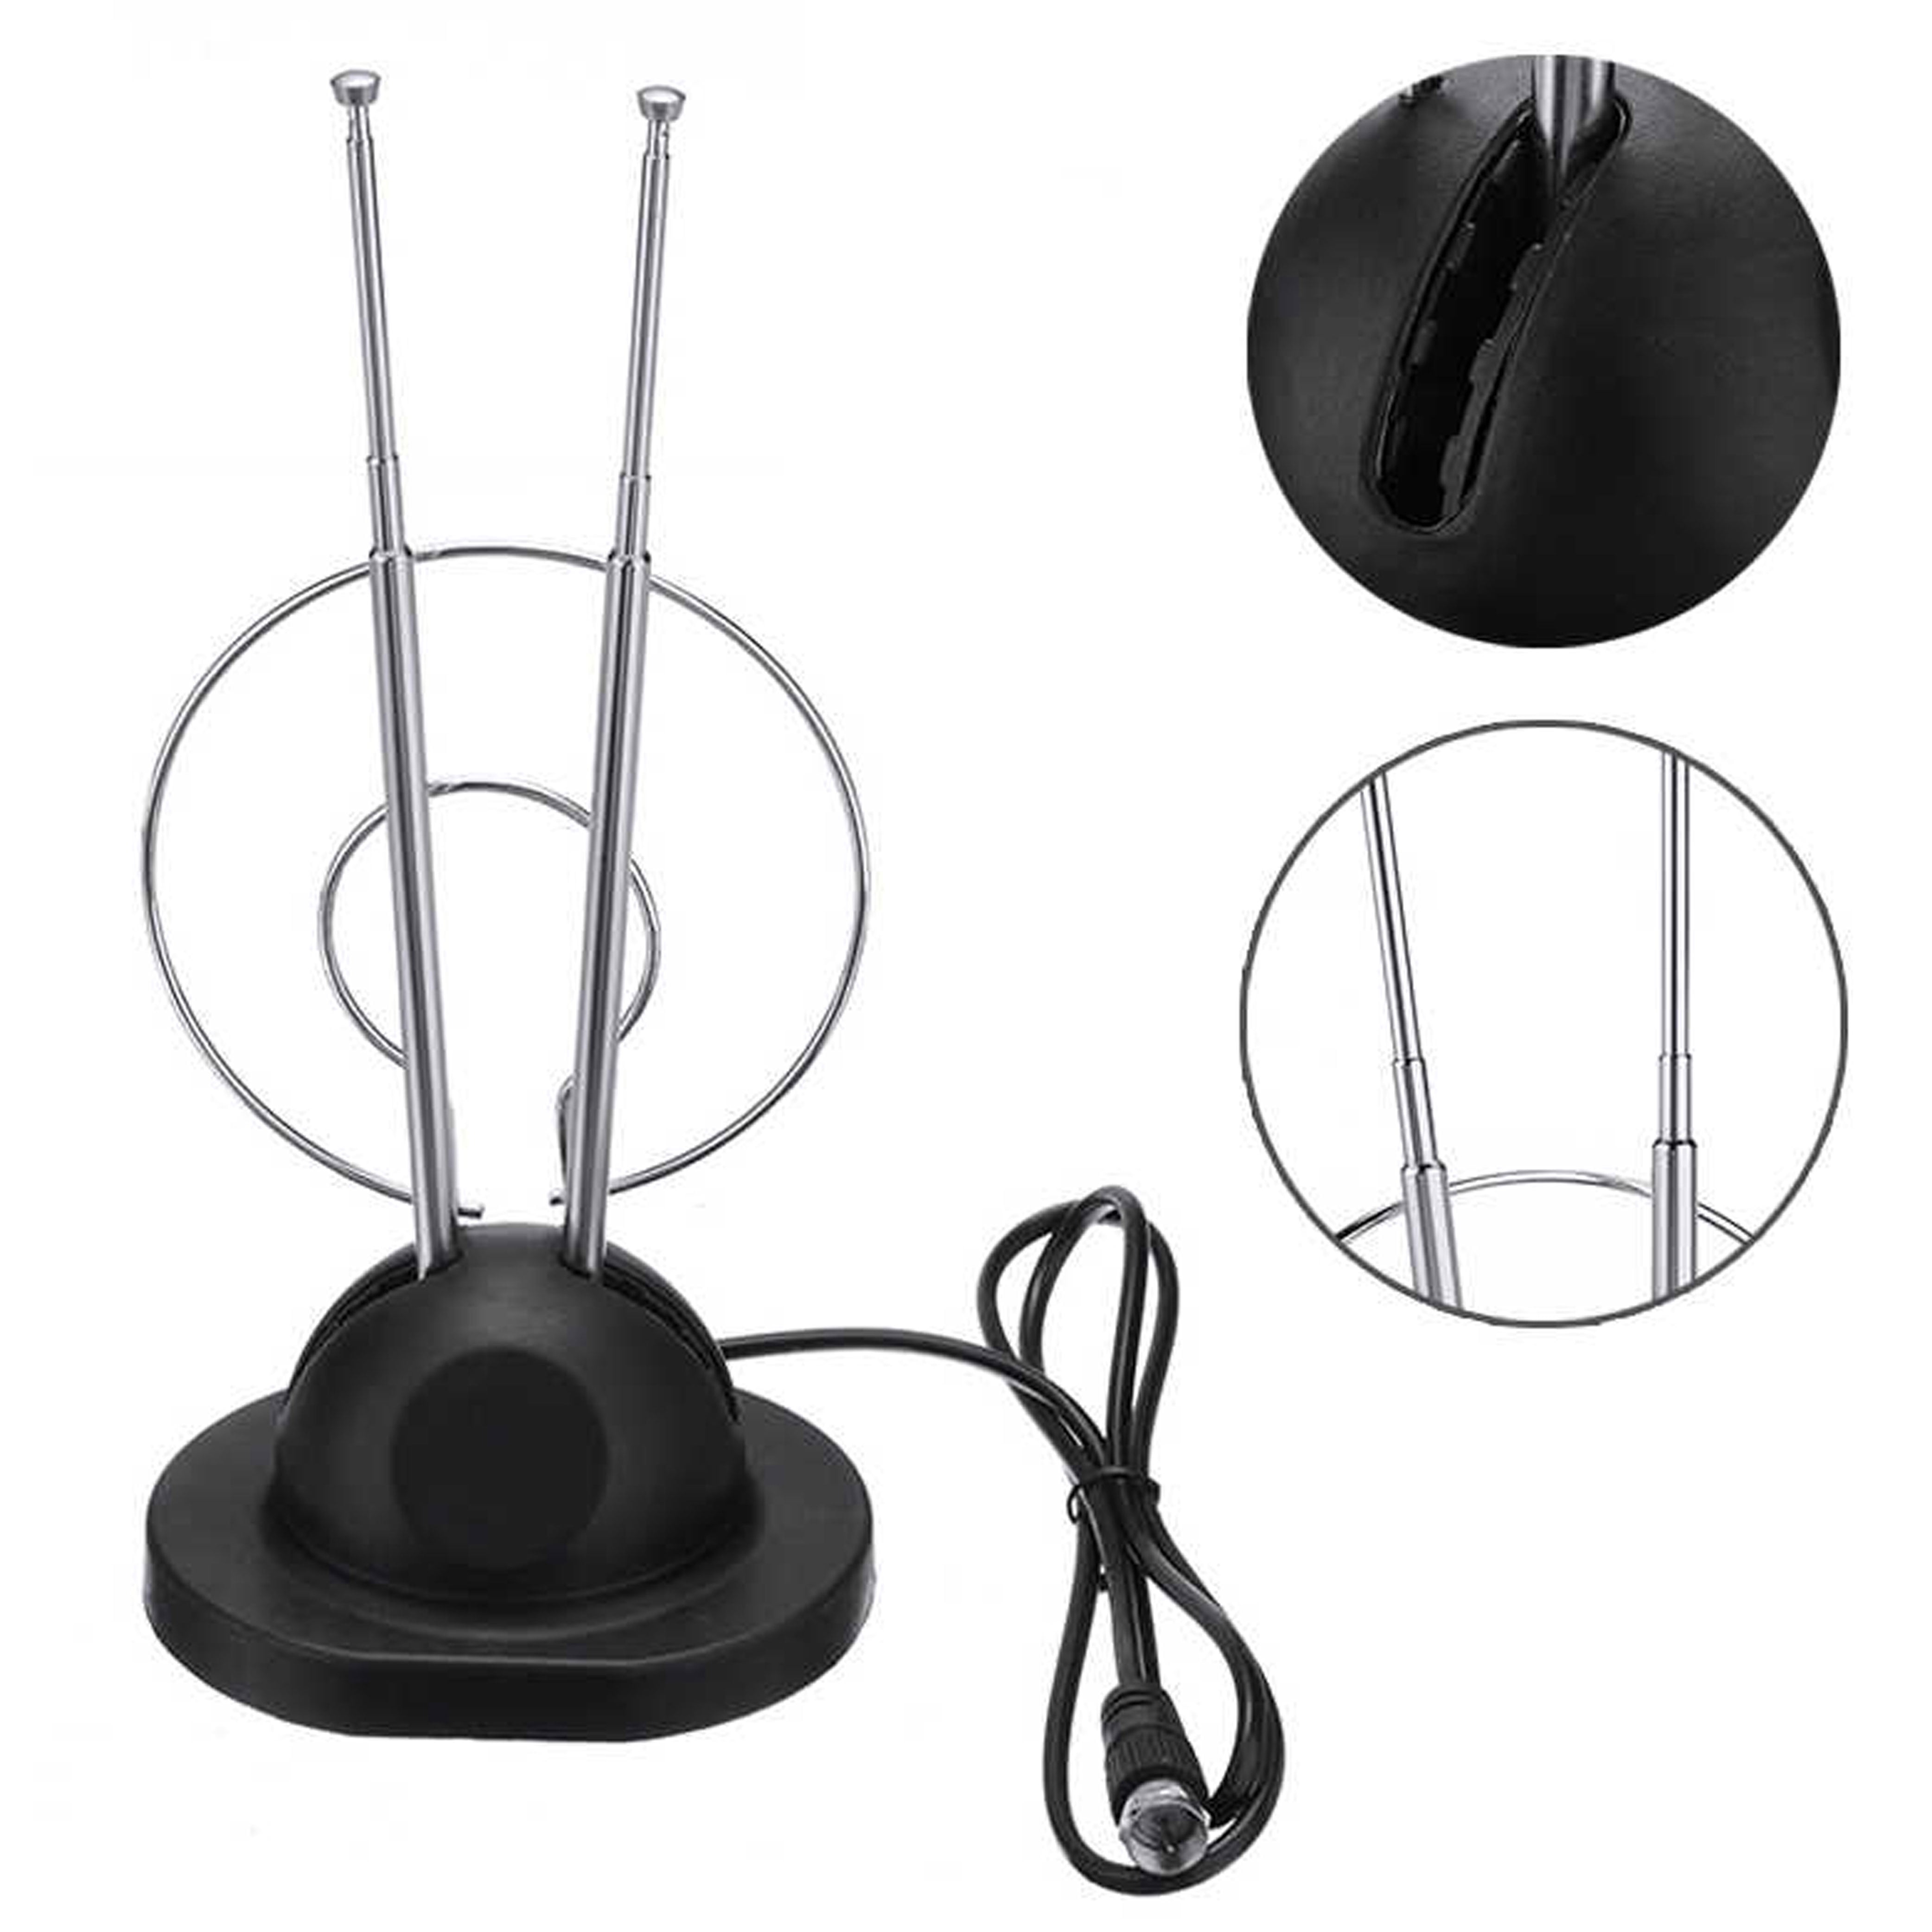 Universal Indoor Rabbit Ear TV Antenna for HDTV Ready VHF UHF Dual Loop Coaxial 